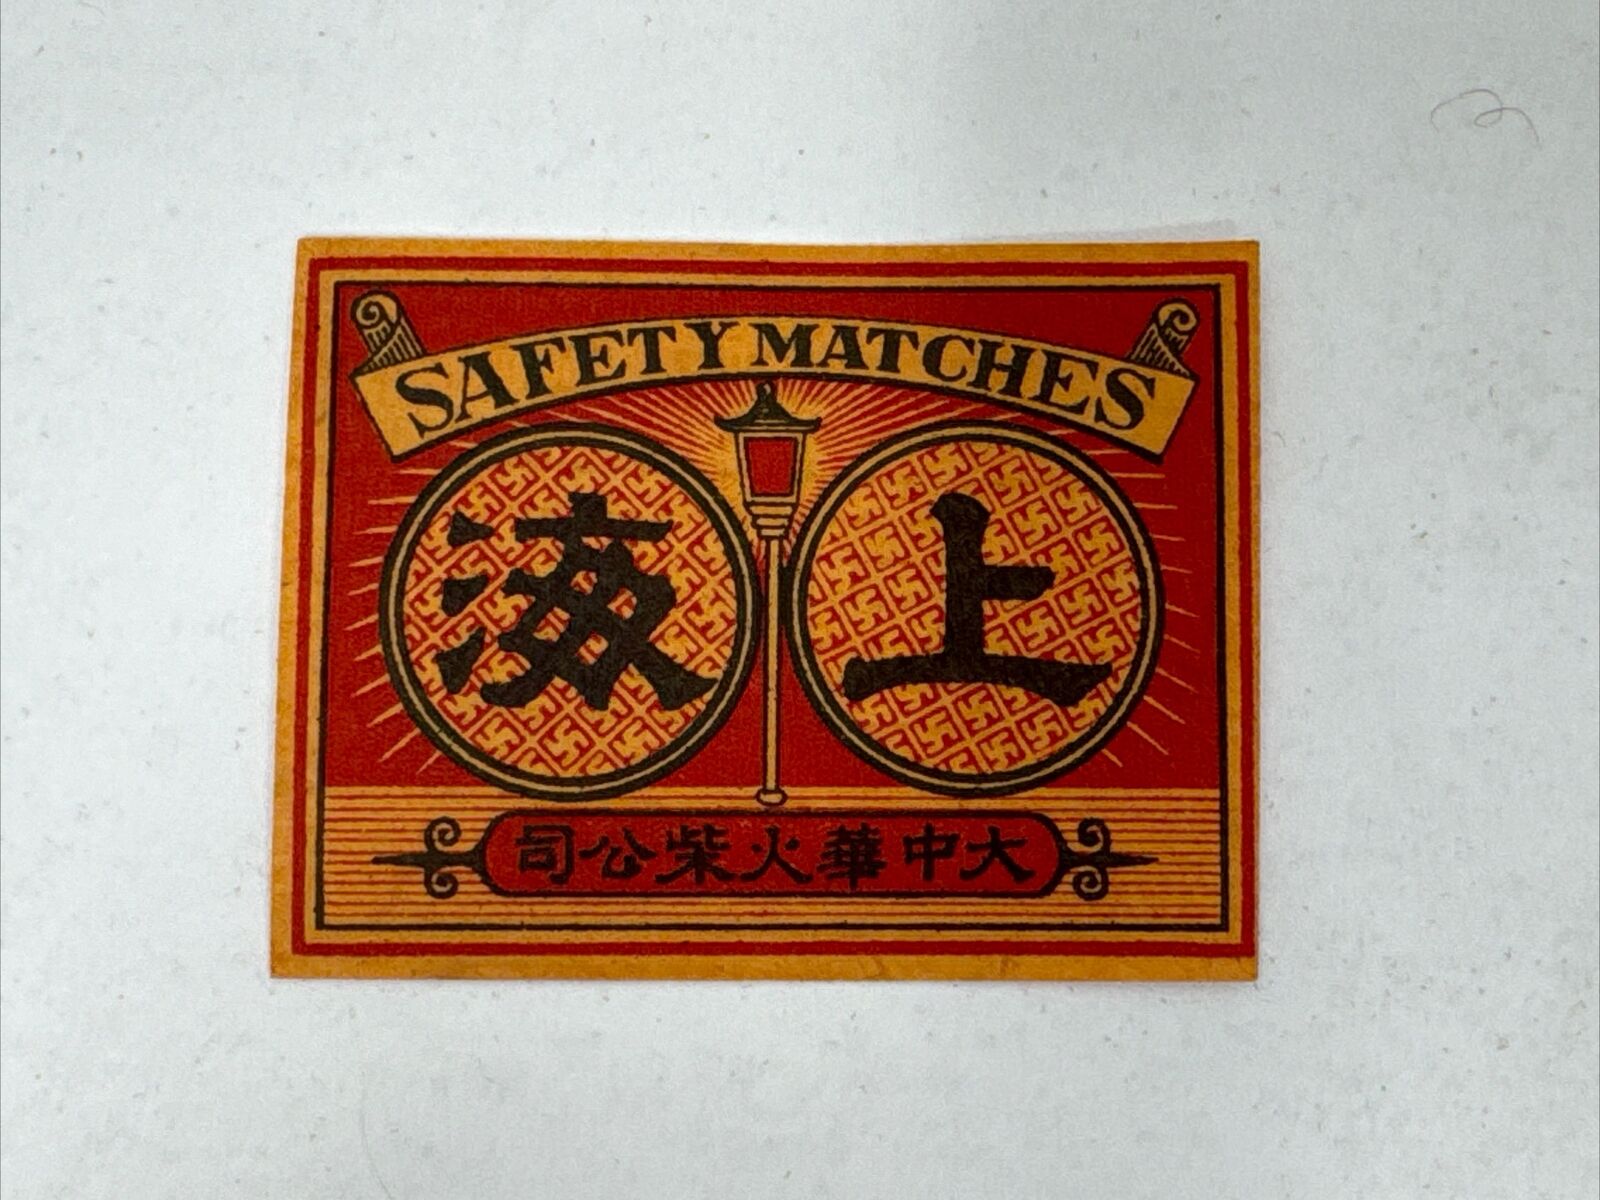 1930's China Chinese Matchbox Label Safety Matches Unused Vintage